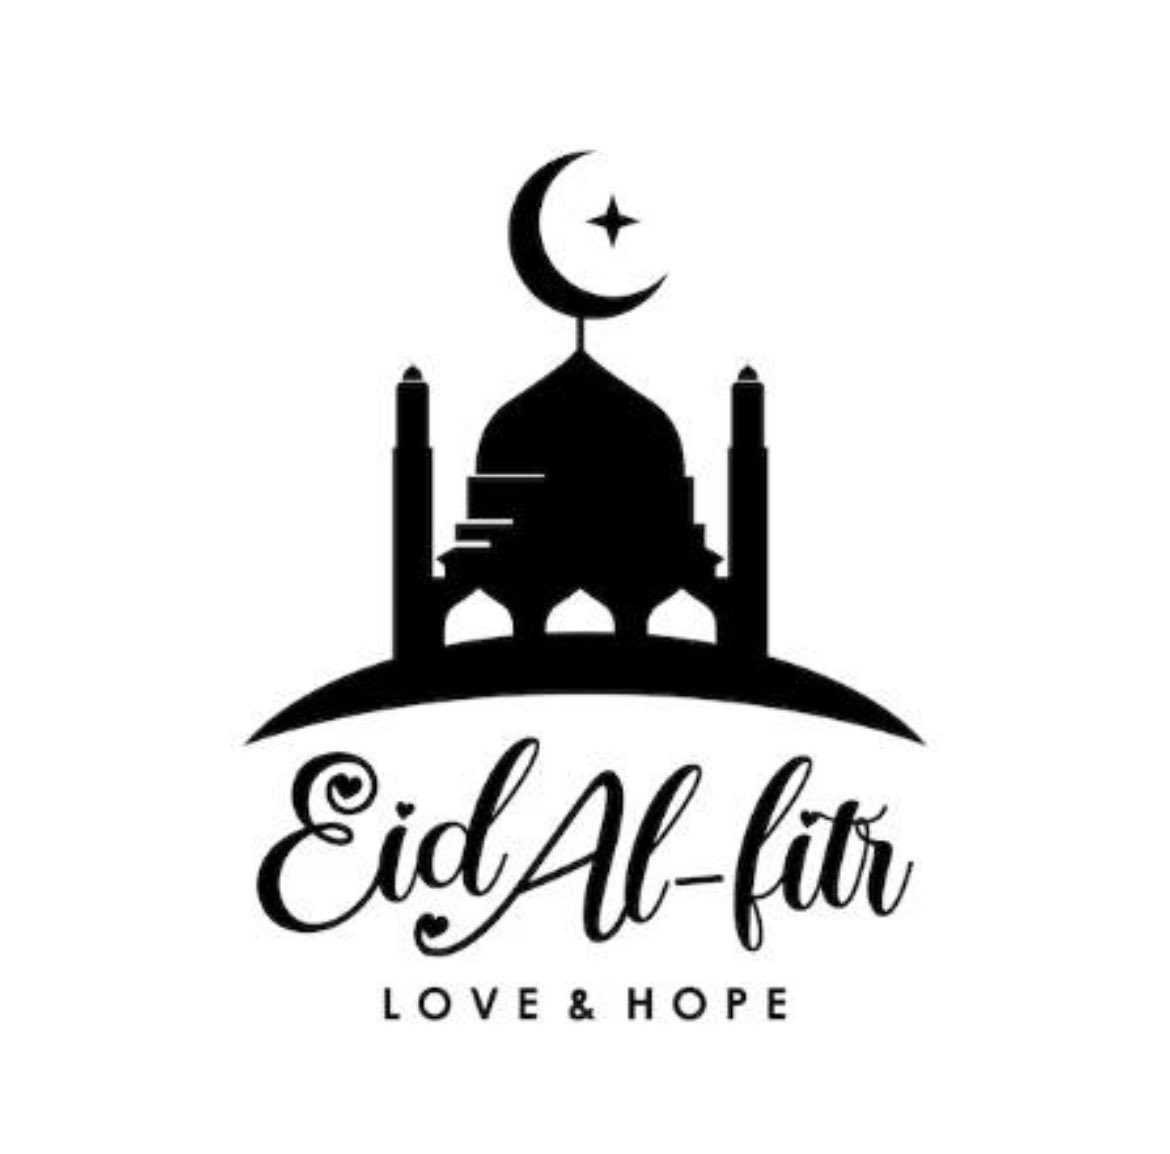 Foundation 92 wishes everyone who celebrates a blessed Eid Al Fitr this evening!